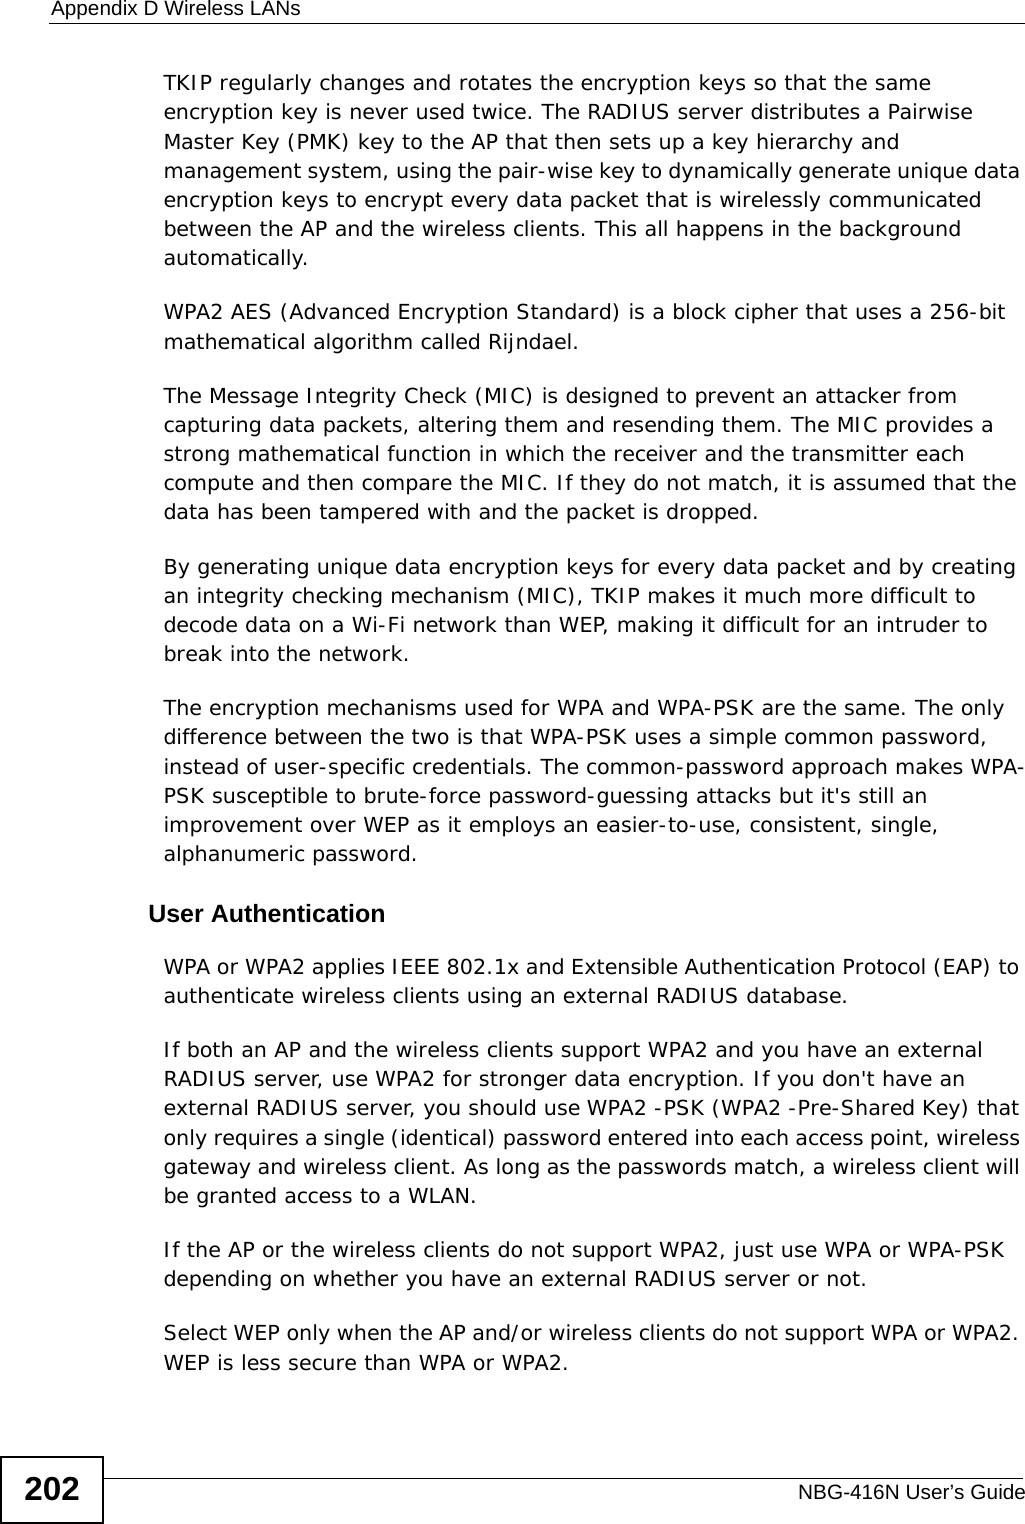 Appendix D Wireless LANsNBG-416N User’s Guide202TKIP regularly changes and rotates the encryption keys so that the same encryption key is never used twice. The RADIUS server distributes a Pairwise Master Key (PMK) key to the AP that then sets up a key hierarchy and management system, using the pair-wise key to dynamically generate unique data encryption keys to encrypt every data packet that is wirelessly communicated between the AP and the wireless clients. This all happens in the background automatically.WPA2 AES (Advanced Encryption Standard) is a block cipher that uses a 256-bit mathematical algorithm called Rijndael.The Message Integrity Check (MIC) is designed to prevent an attacker from capturing data packets, altering them and resending them. The MIC provides a strong mathematical function in which the receiver and the transmitter each compute and then compare the MIC. If they do not match, it is assumed that the data has been tampered with and the packet is dropped. By generating unique data encryption keys for every data packet and by creating an integrity checking mechanism (MIC), TKIP makes it much more difficult to decode data on a Wi-Fi network than WEP, making it difficult for an intruder to break into the network. The encryption mechanisms used for WPA and WPA-PSK are the same. The only difference between the two is that WPA-PSK uses a simple common password, instead of user-specific credentials. The common-password approach makes WPA-PSK susceptible to brute-force password-guessing attacks but it&apos;s still an improvement over WEP as it employs an easier-to-use, consistent, single, alphanumeric password.              User AuthenticationWPA or WPA2 applies IEEE 802.1x and Extensible Authentication Protocol (EAP) to authenticate wireless clients using an external RADIUS database. If both an AP and the wireless clients support WPA2 and you have an external RADIUS server, use WPA2 for stronger data encryption. If you don&apos;t have an external RADIUS server, you should use WPA2 -PSK (WPA2 -Pre-Shared Key) that only requires a single (identical) password entered into each access point, wireless gateway and wireless client. As long as the passwords match, a wireless client will be granted access to a WLAN. If the AP or the wireless clients do not support WPA2, just use WPA or WPA-PSK depending on whether you have an external RADIUS server or not.Select WEP only when the AP and/or wireless clients do not support WPA or WPA2. WEP is less secure than WPA or WPA2.